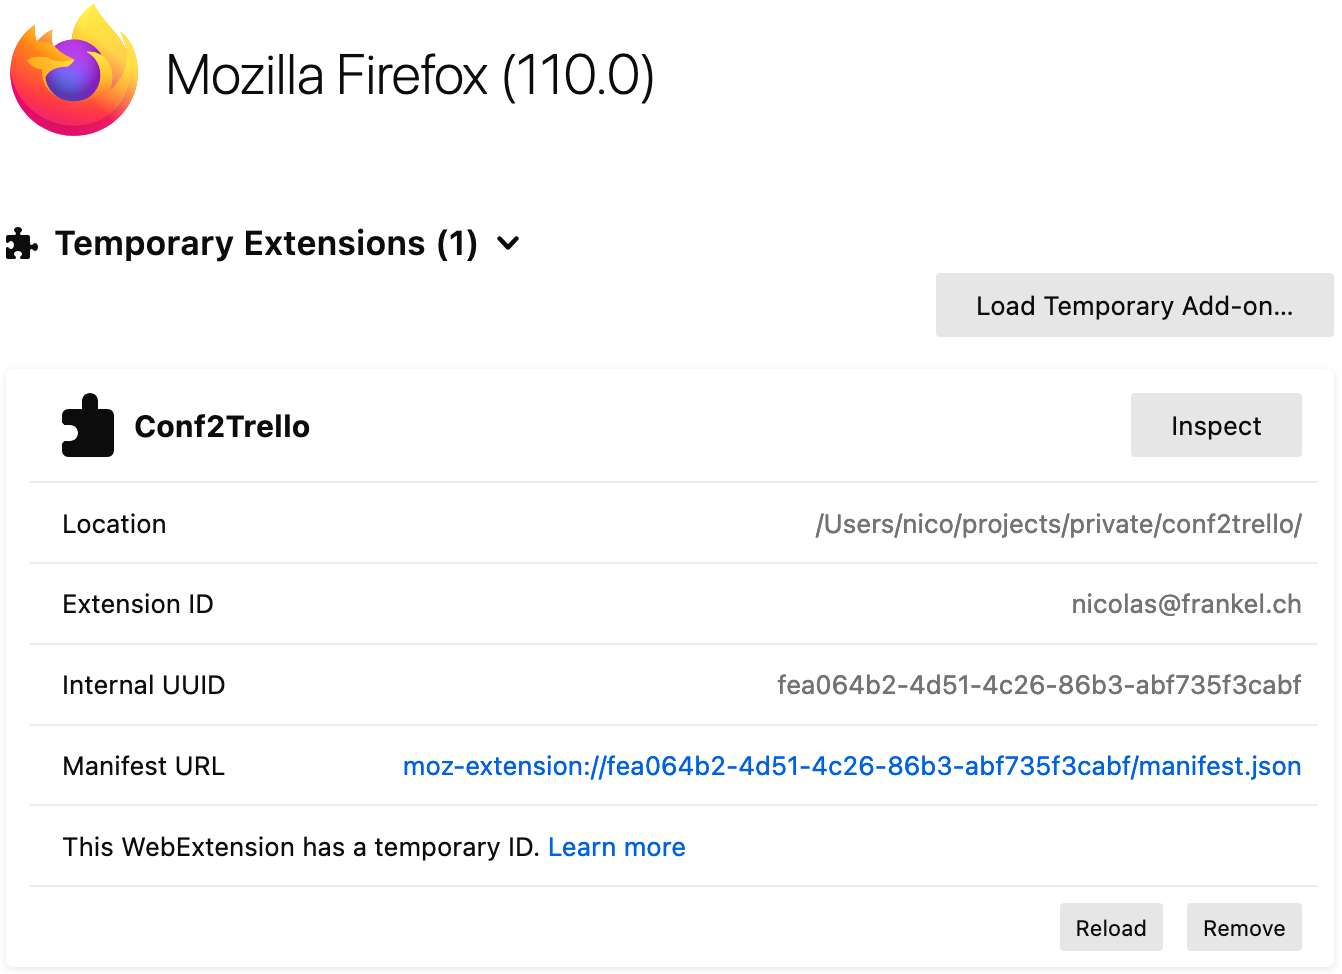 A new temporary Firefox extension loaded